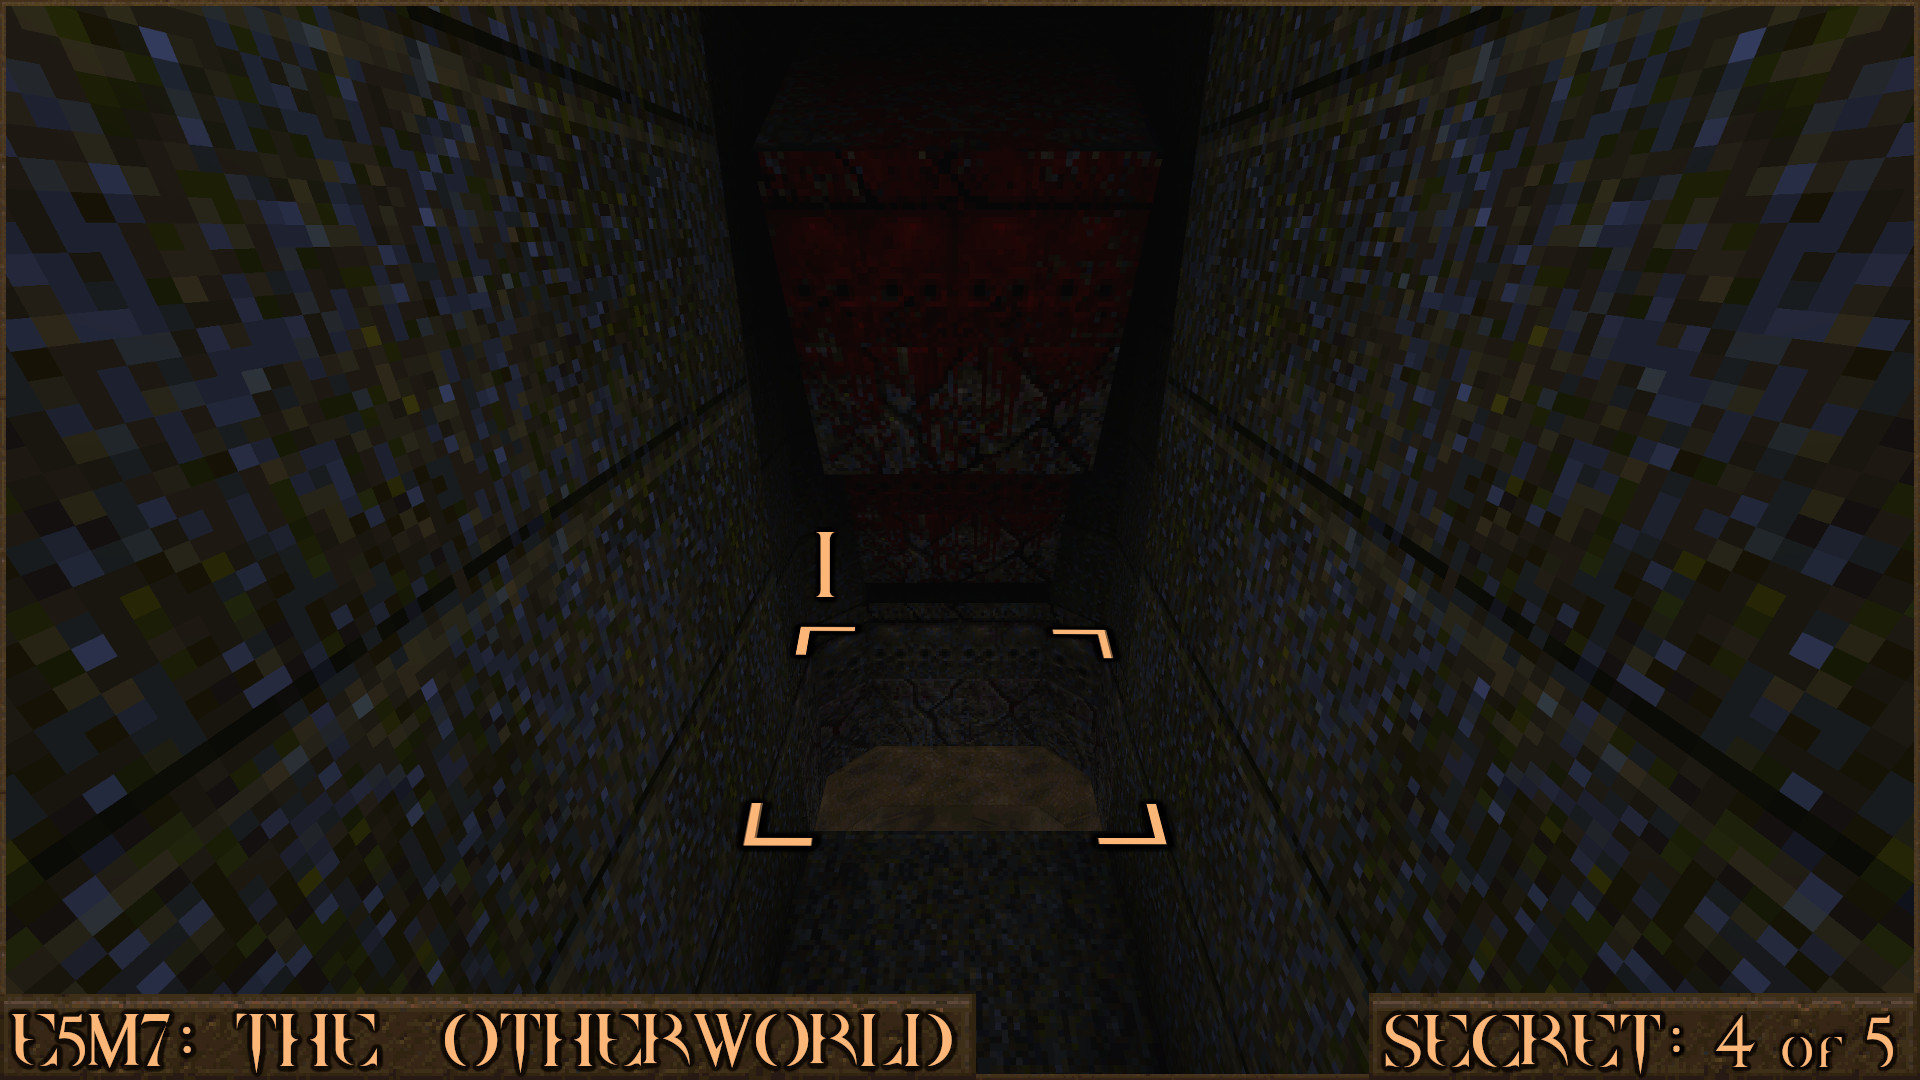 Quake Finding All Secrets in Quake Expansion pack: Dimension of the Past - E5M7: The Otherworld - 2036F20